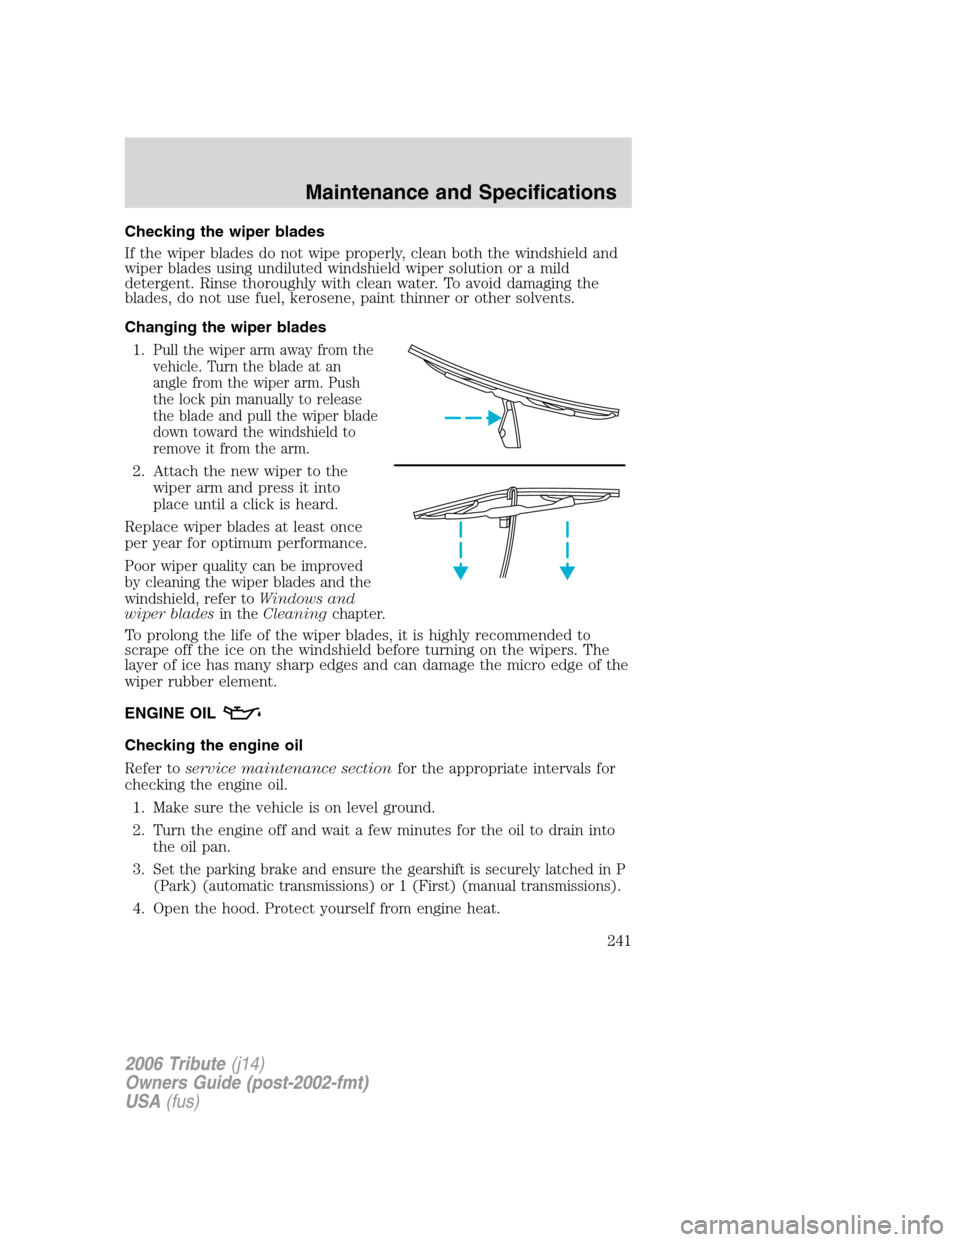 MAZDA MODEL TRIBUTE 2006  Owners Manual (in English) Checking the wiper blades
If the wiper blades do not wipe properly, clean both the windshield and
wiper blades using undiluted windshield wiper solution or a mild
detergent. Rinse thoroughly with clea